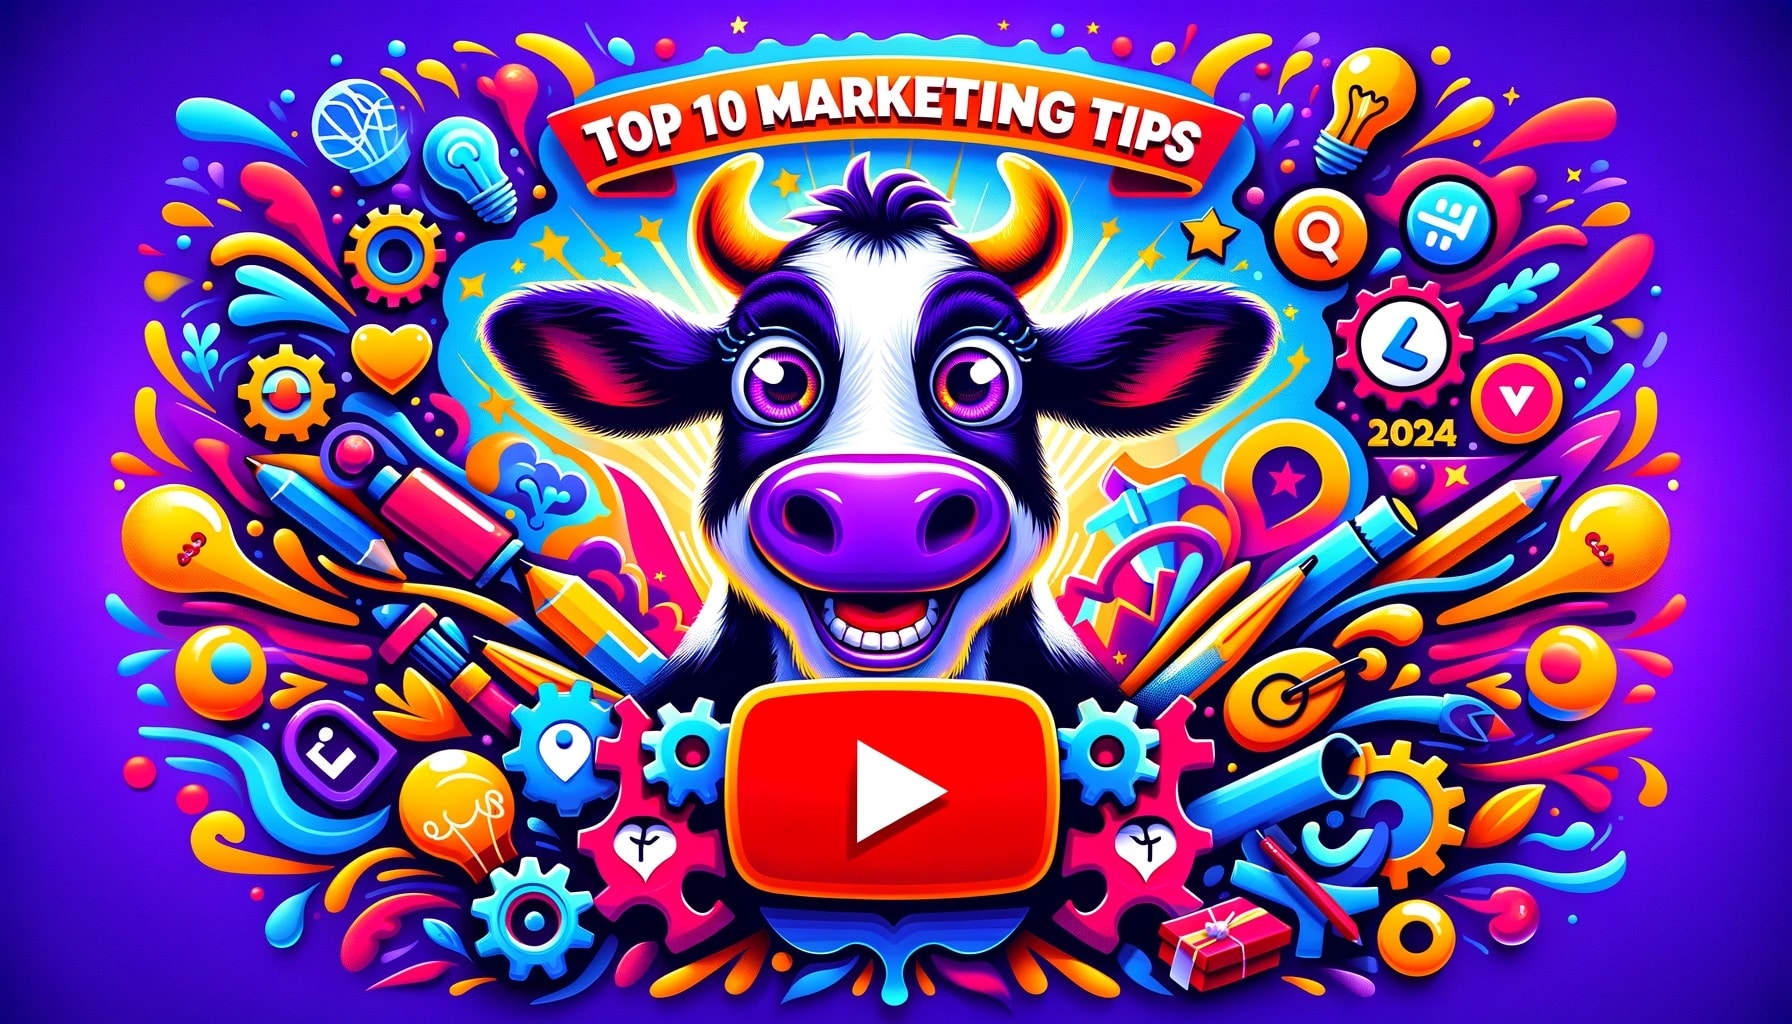 Top 10 SEO Tips For 2024, image of purple cow with youtube play icon surrounded by colorful blobs of tech items swirling around the a smiling cute little purple cow